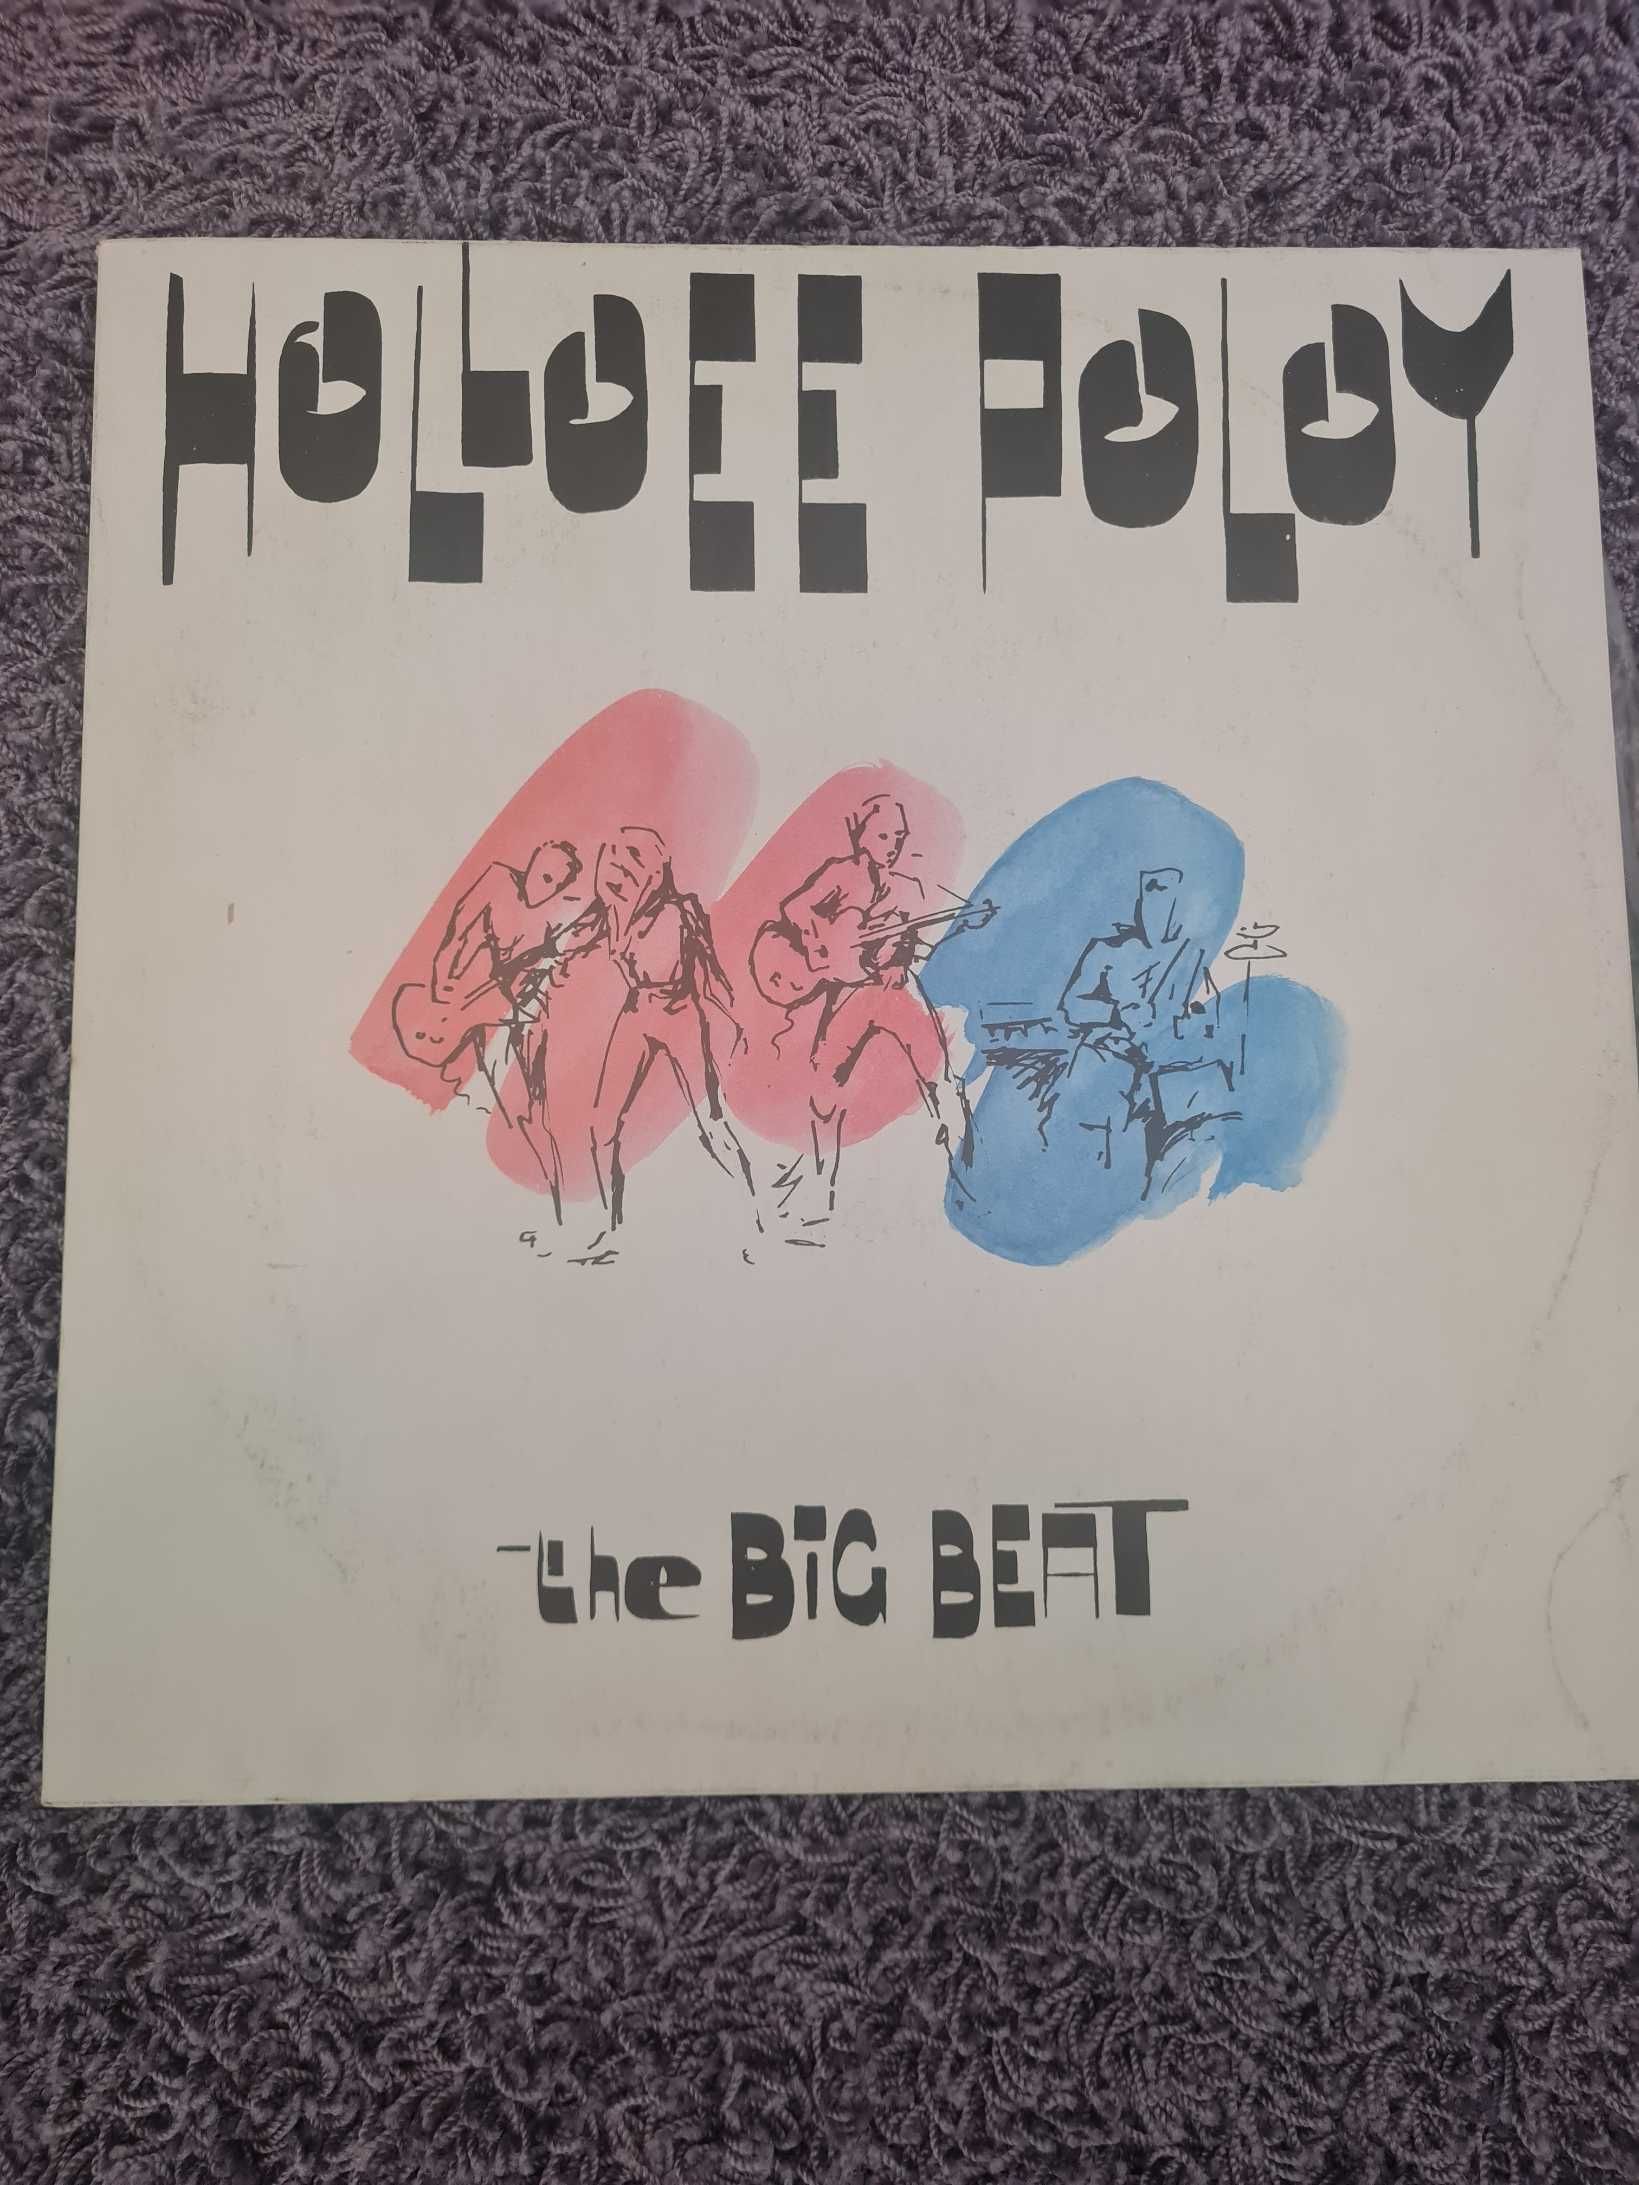 Winyl Holloee Poloy – The Big Beat 1990